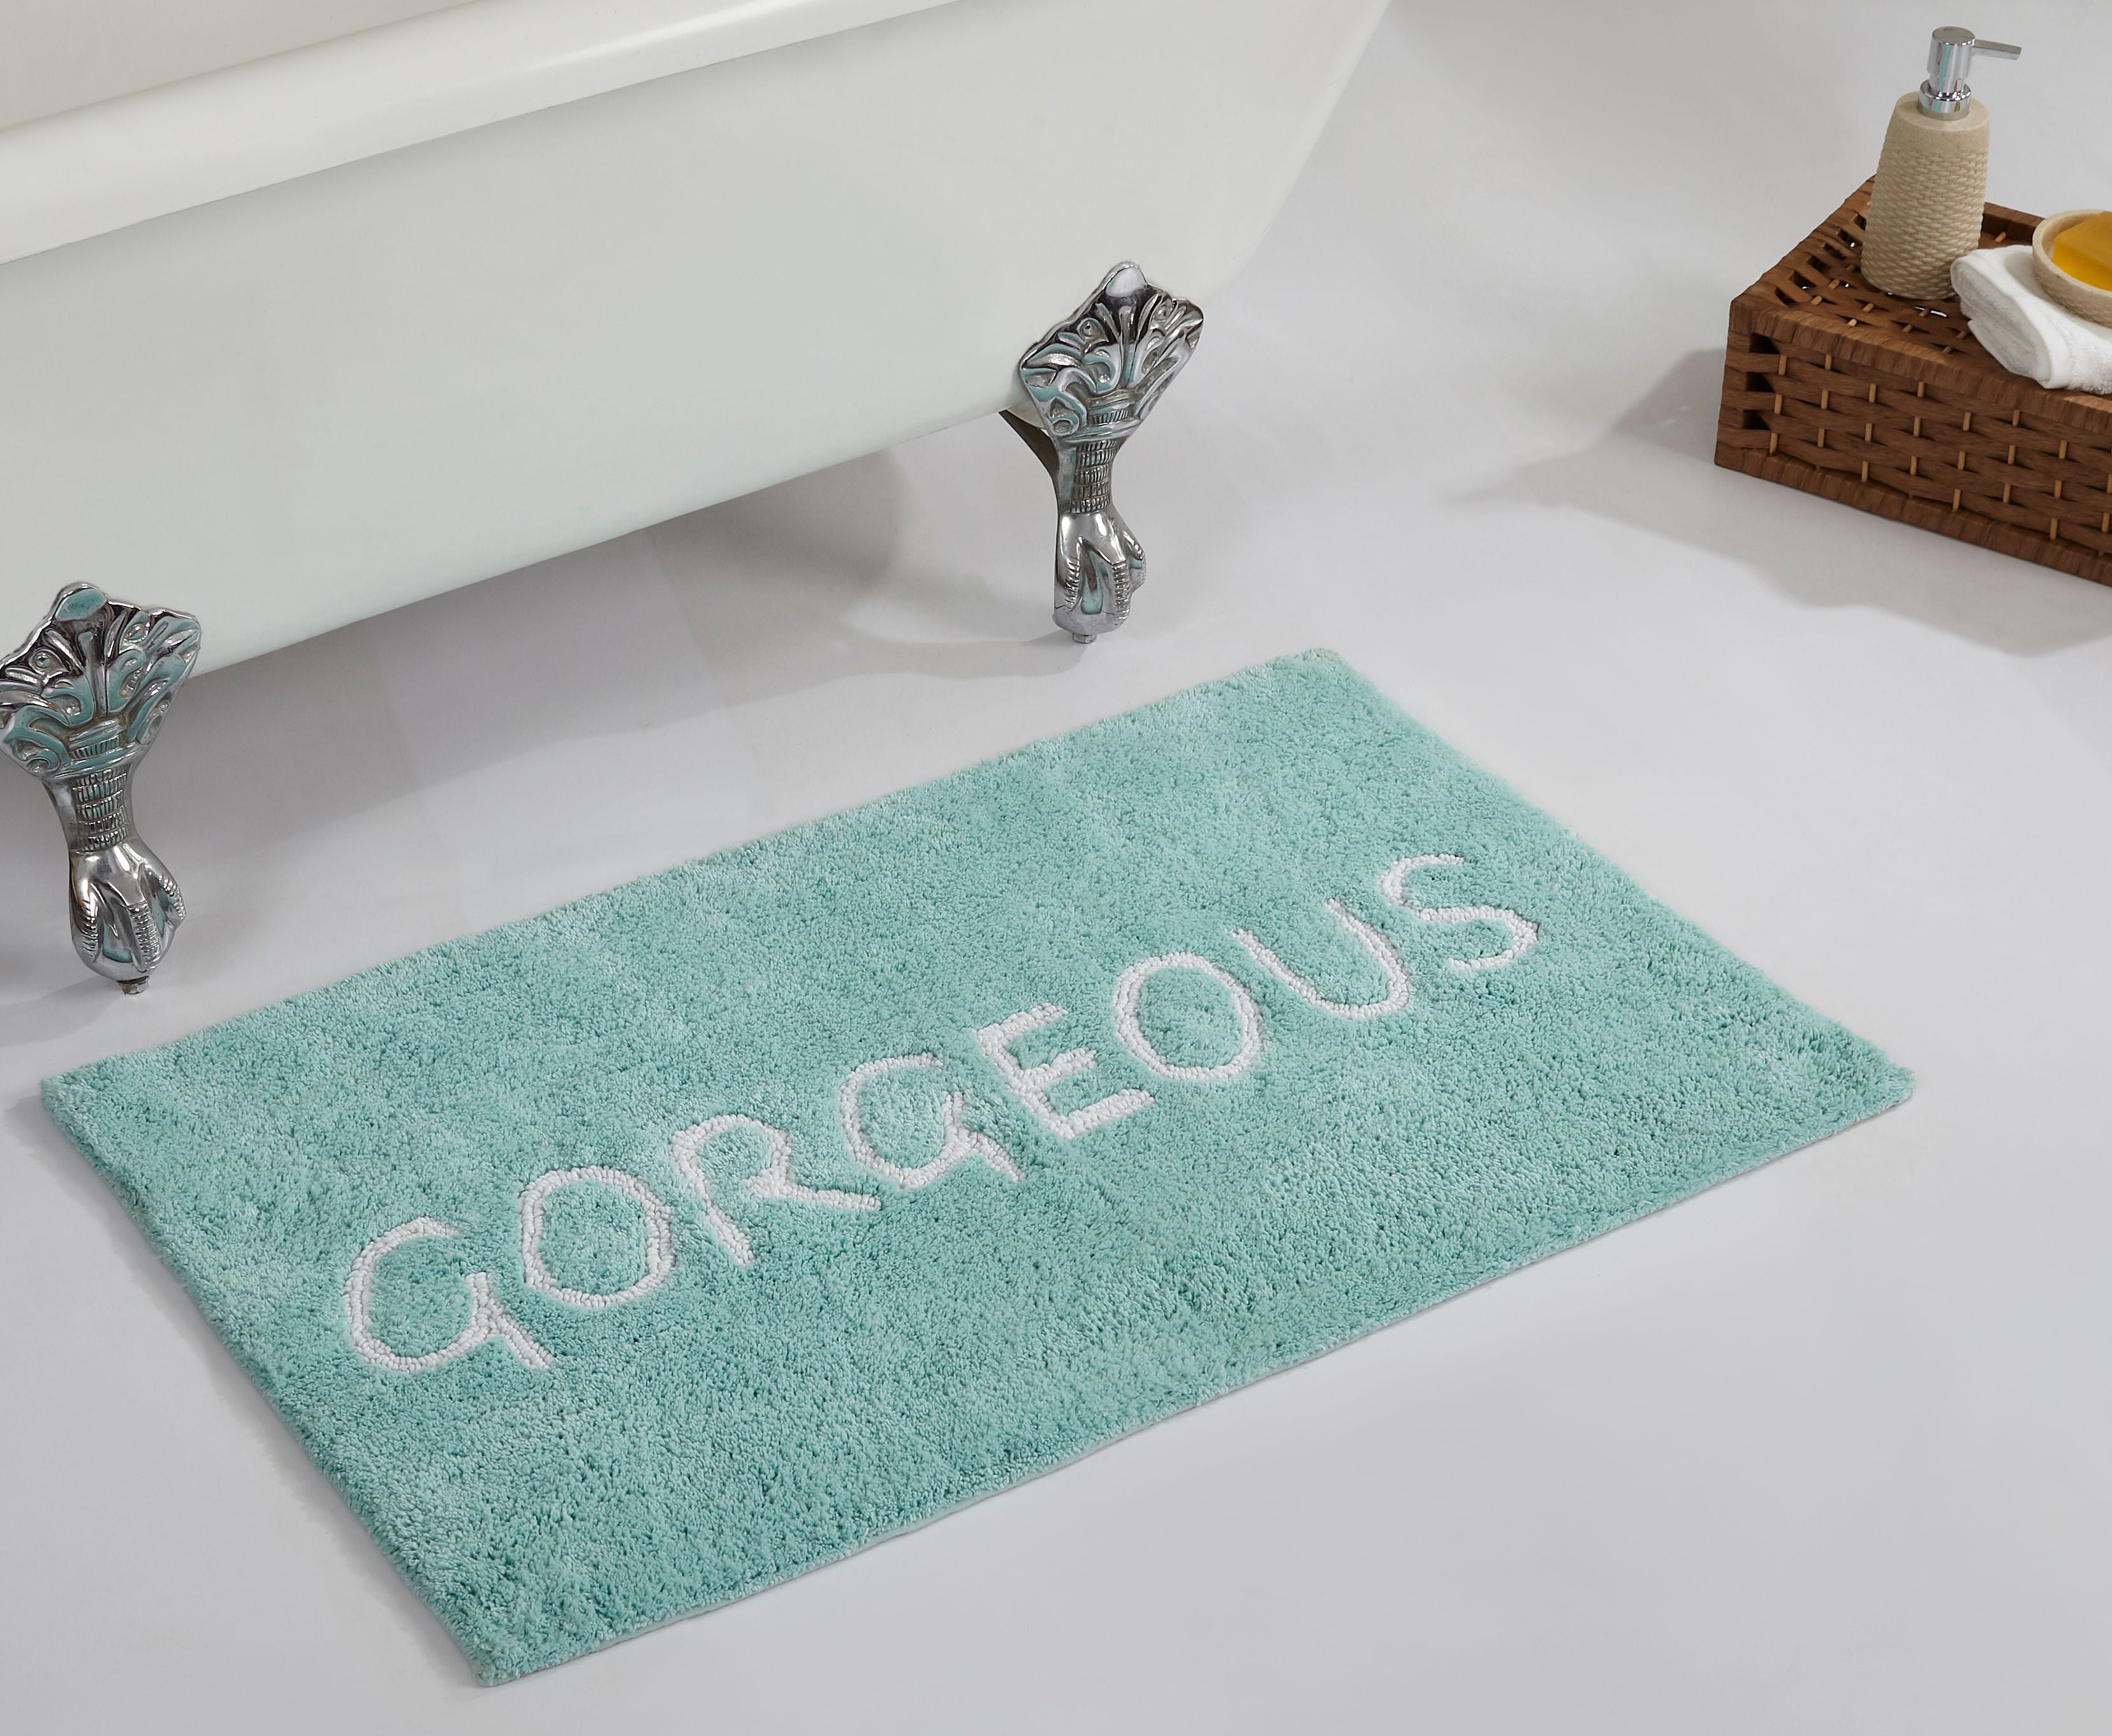 Better Trends River Rock Collection is Ultra Soft Aqua Plush and Absorbent Tufted Bath Mat Rug 100 Percent Cotton in Vibrant Colors 3pc Set 